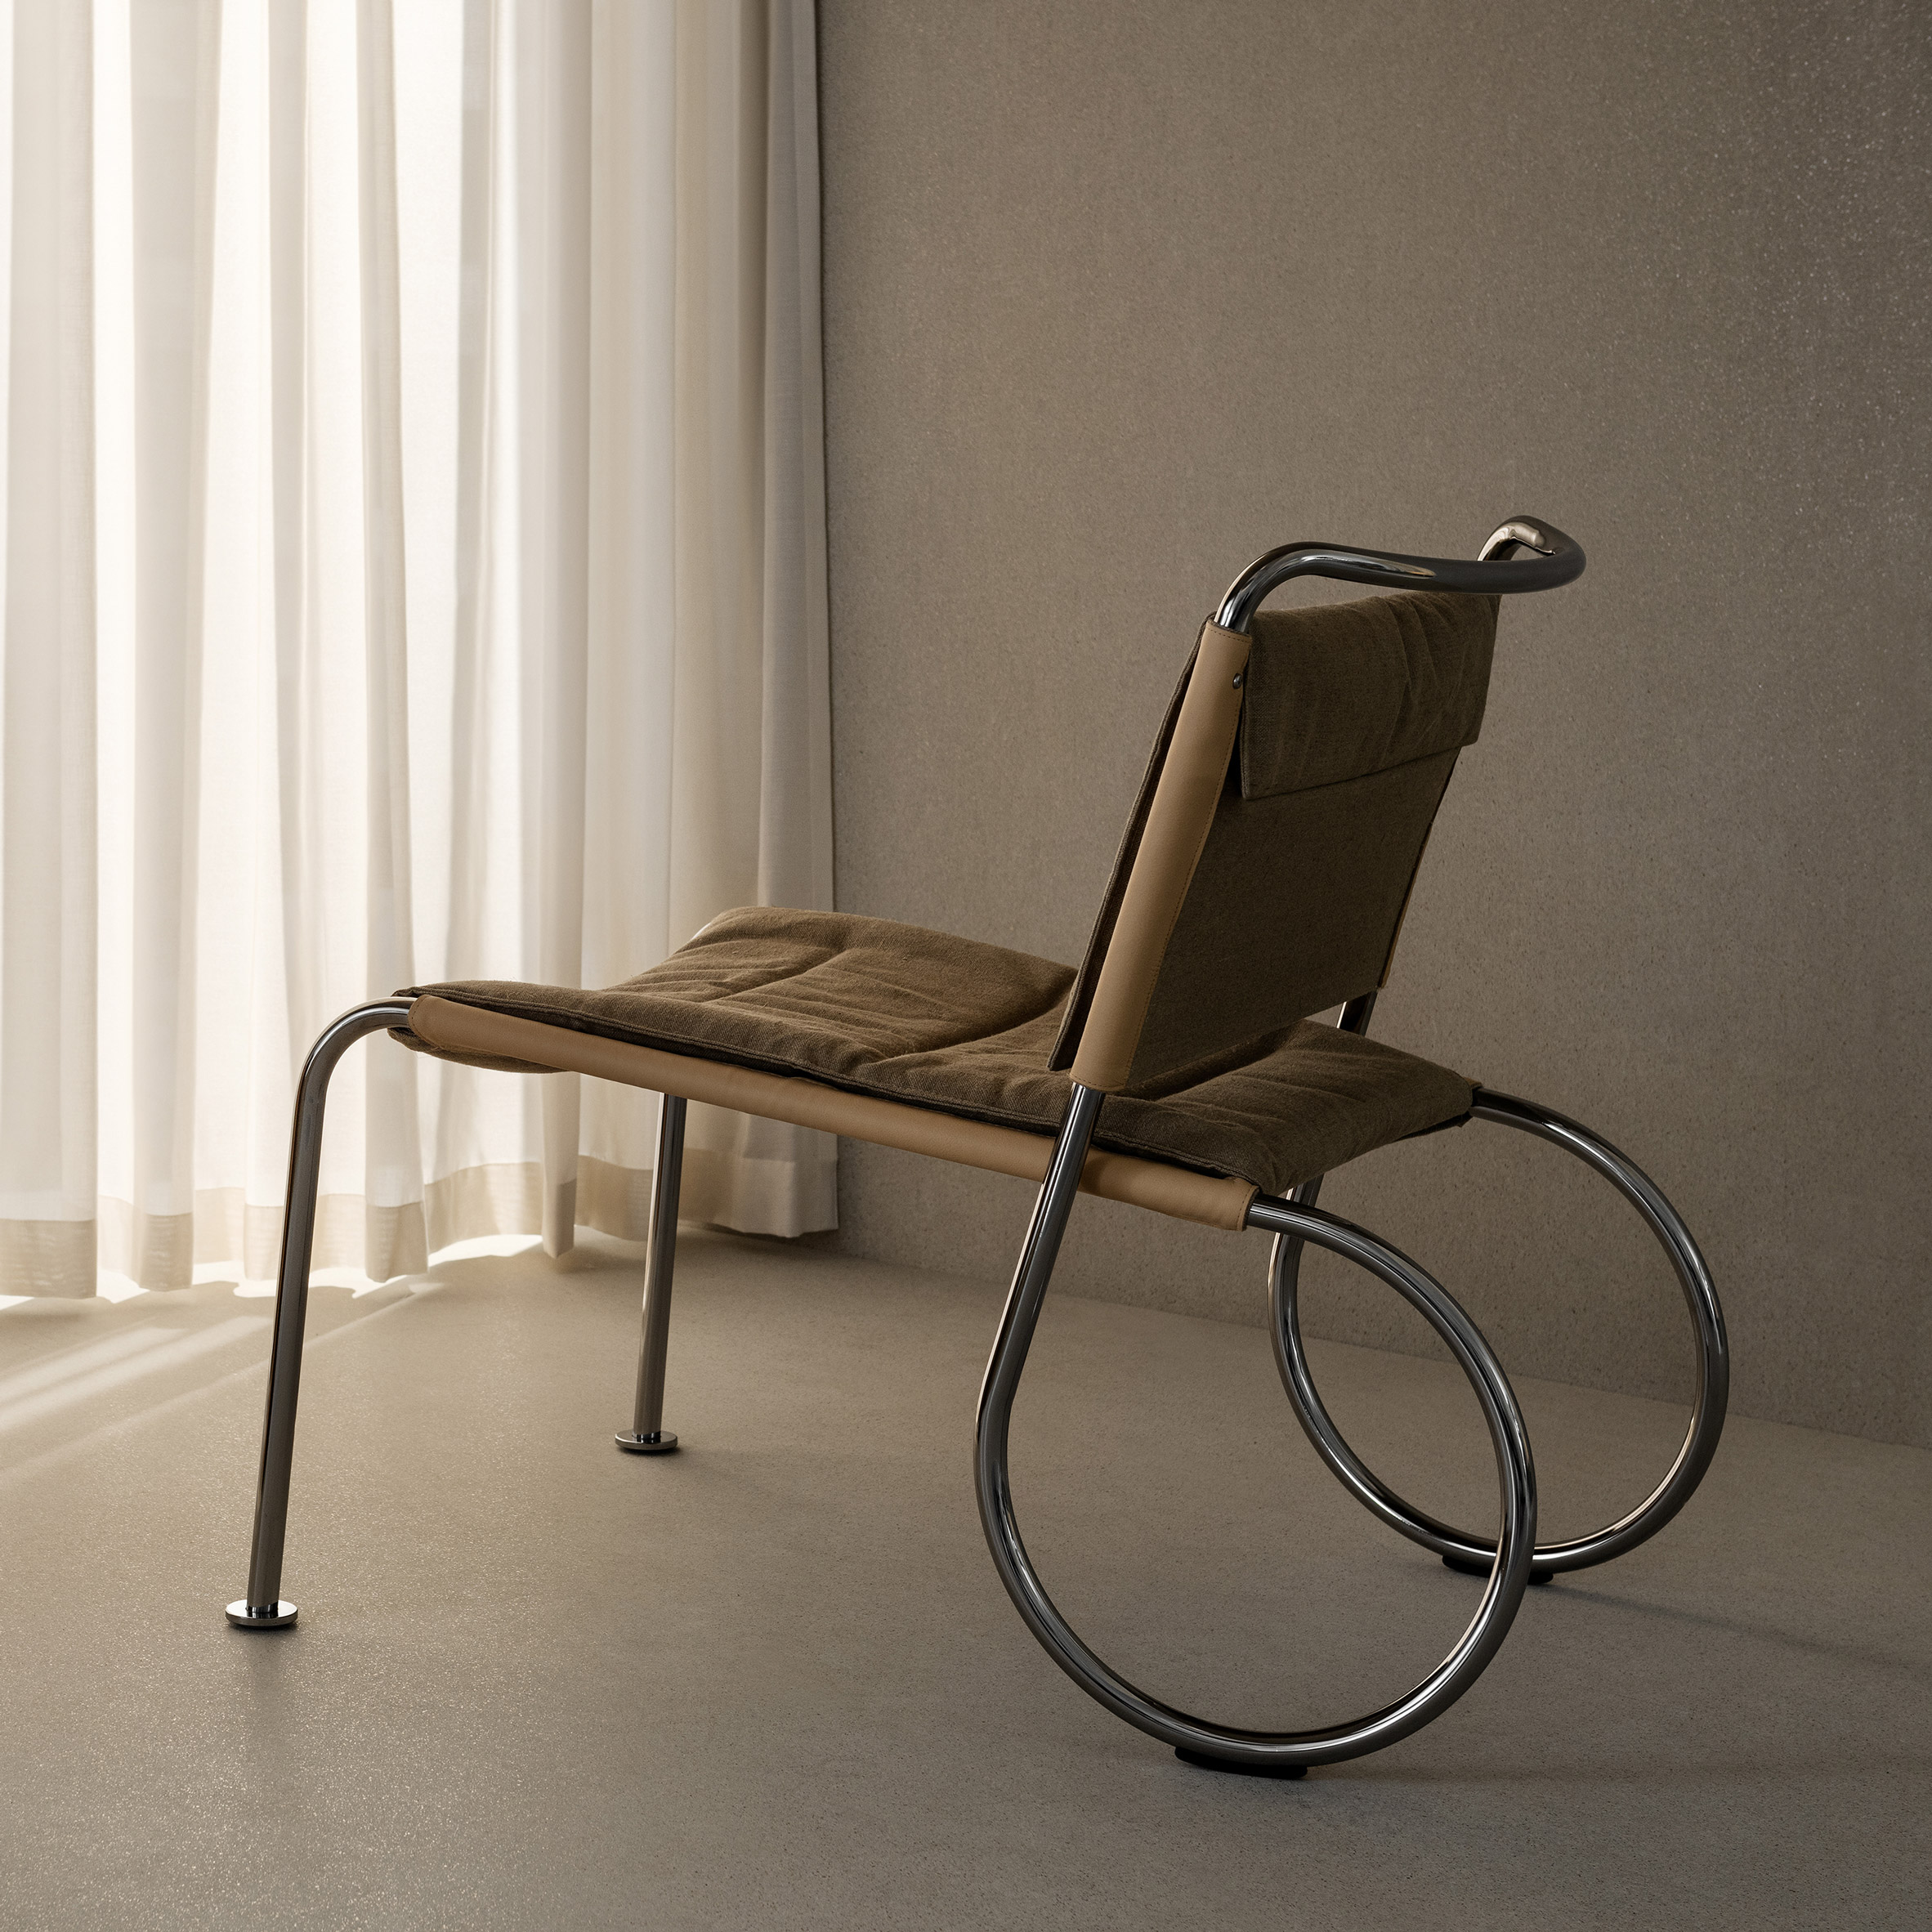 Corso easy chair by Peter Andersson for Lammhults